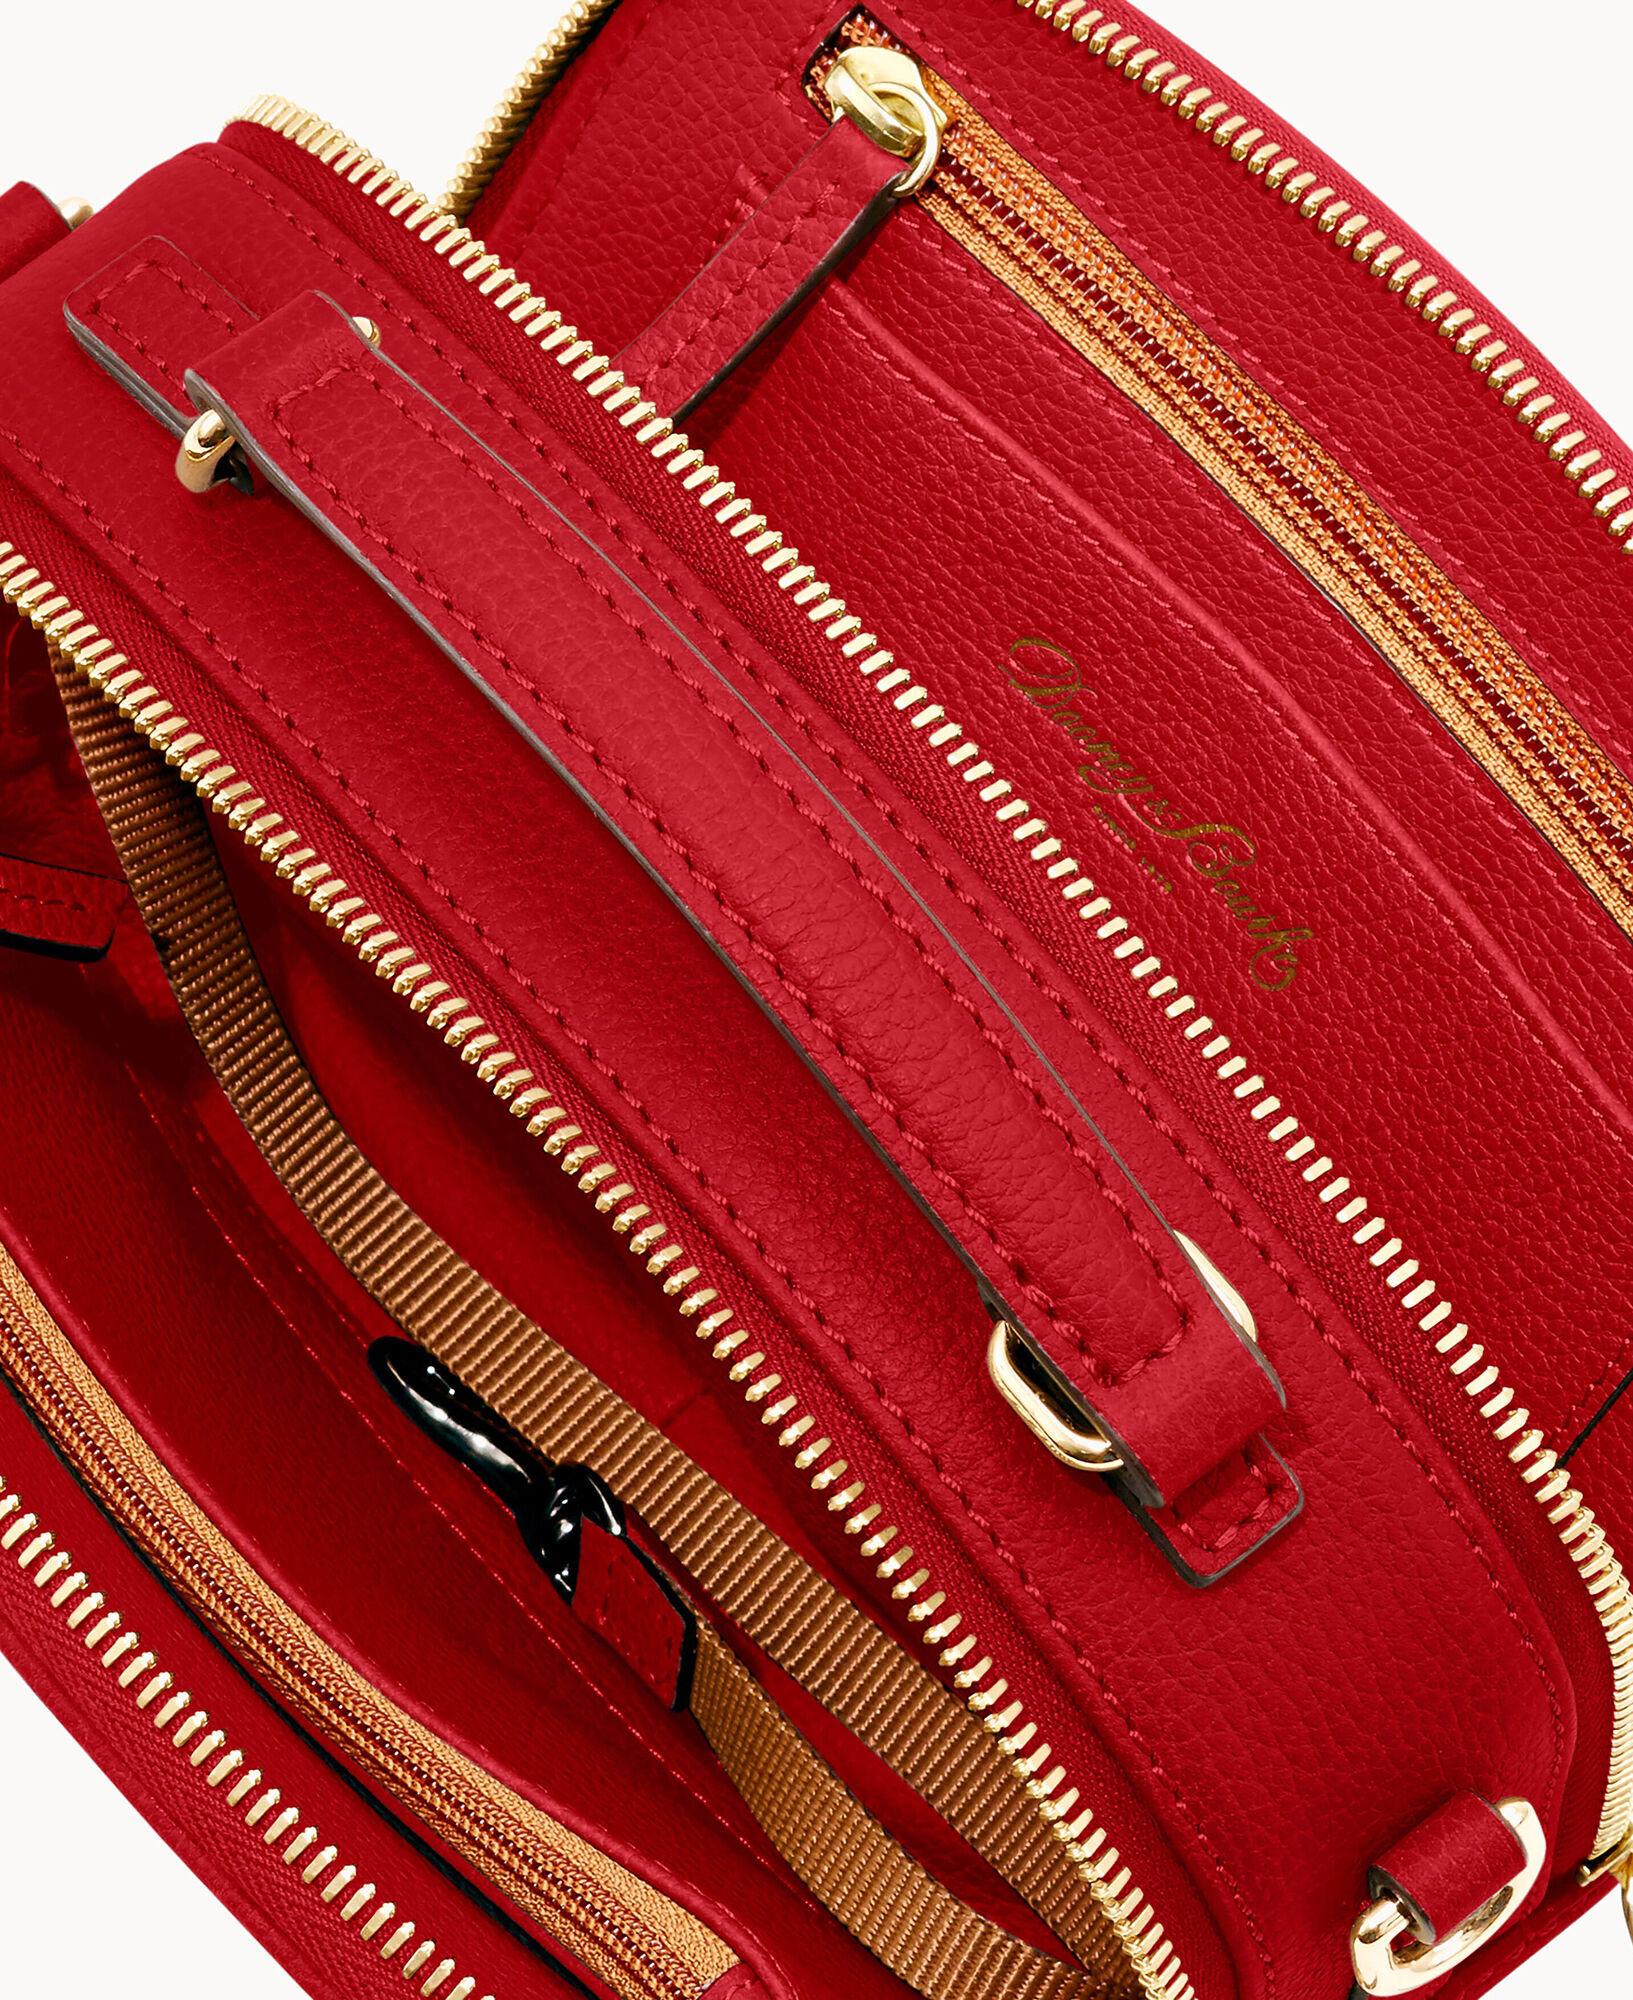 Ostrich Leather Pocket Pounch L27 with Double Zip Wide Opening Top Handle Bags Super-Versatile